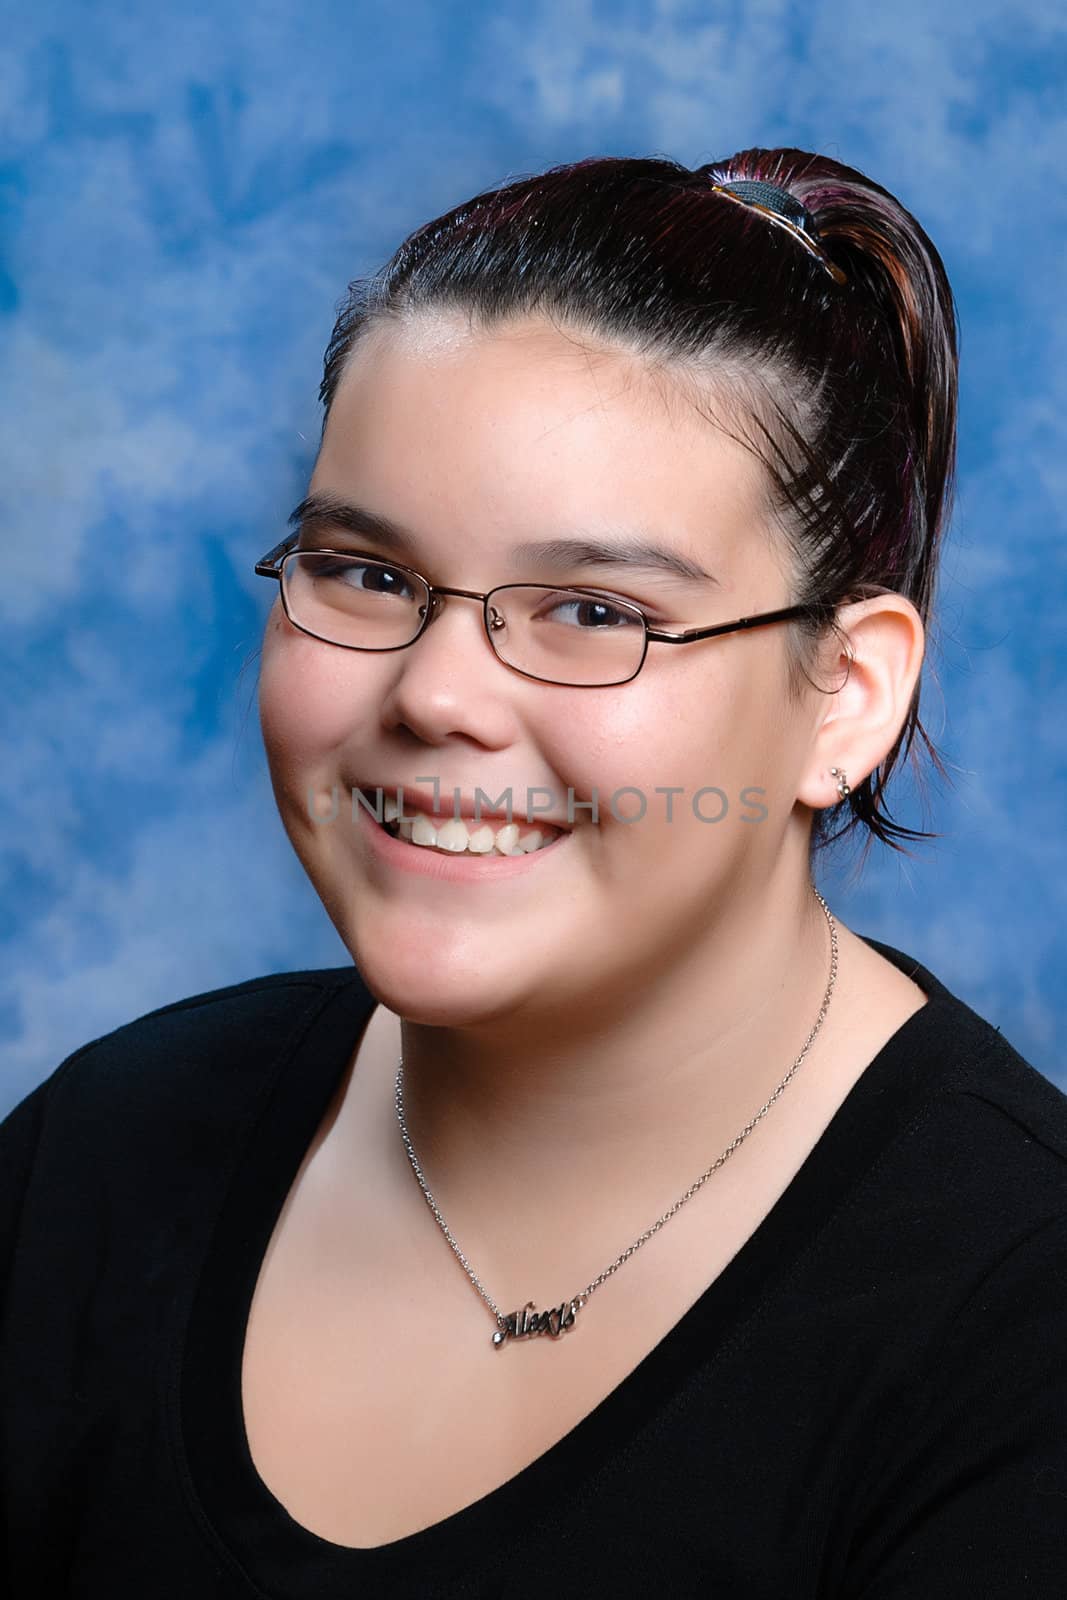 A smiling preteen girl portrait with a blue background